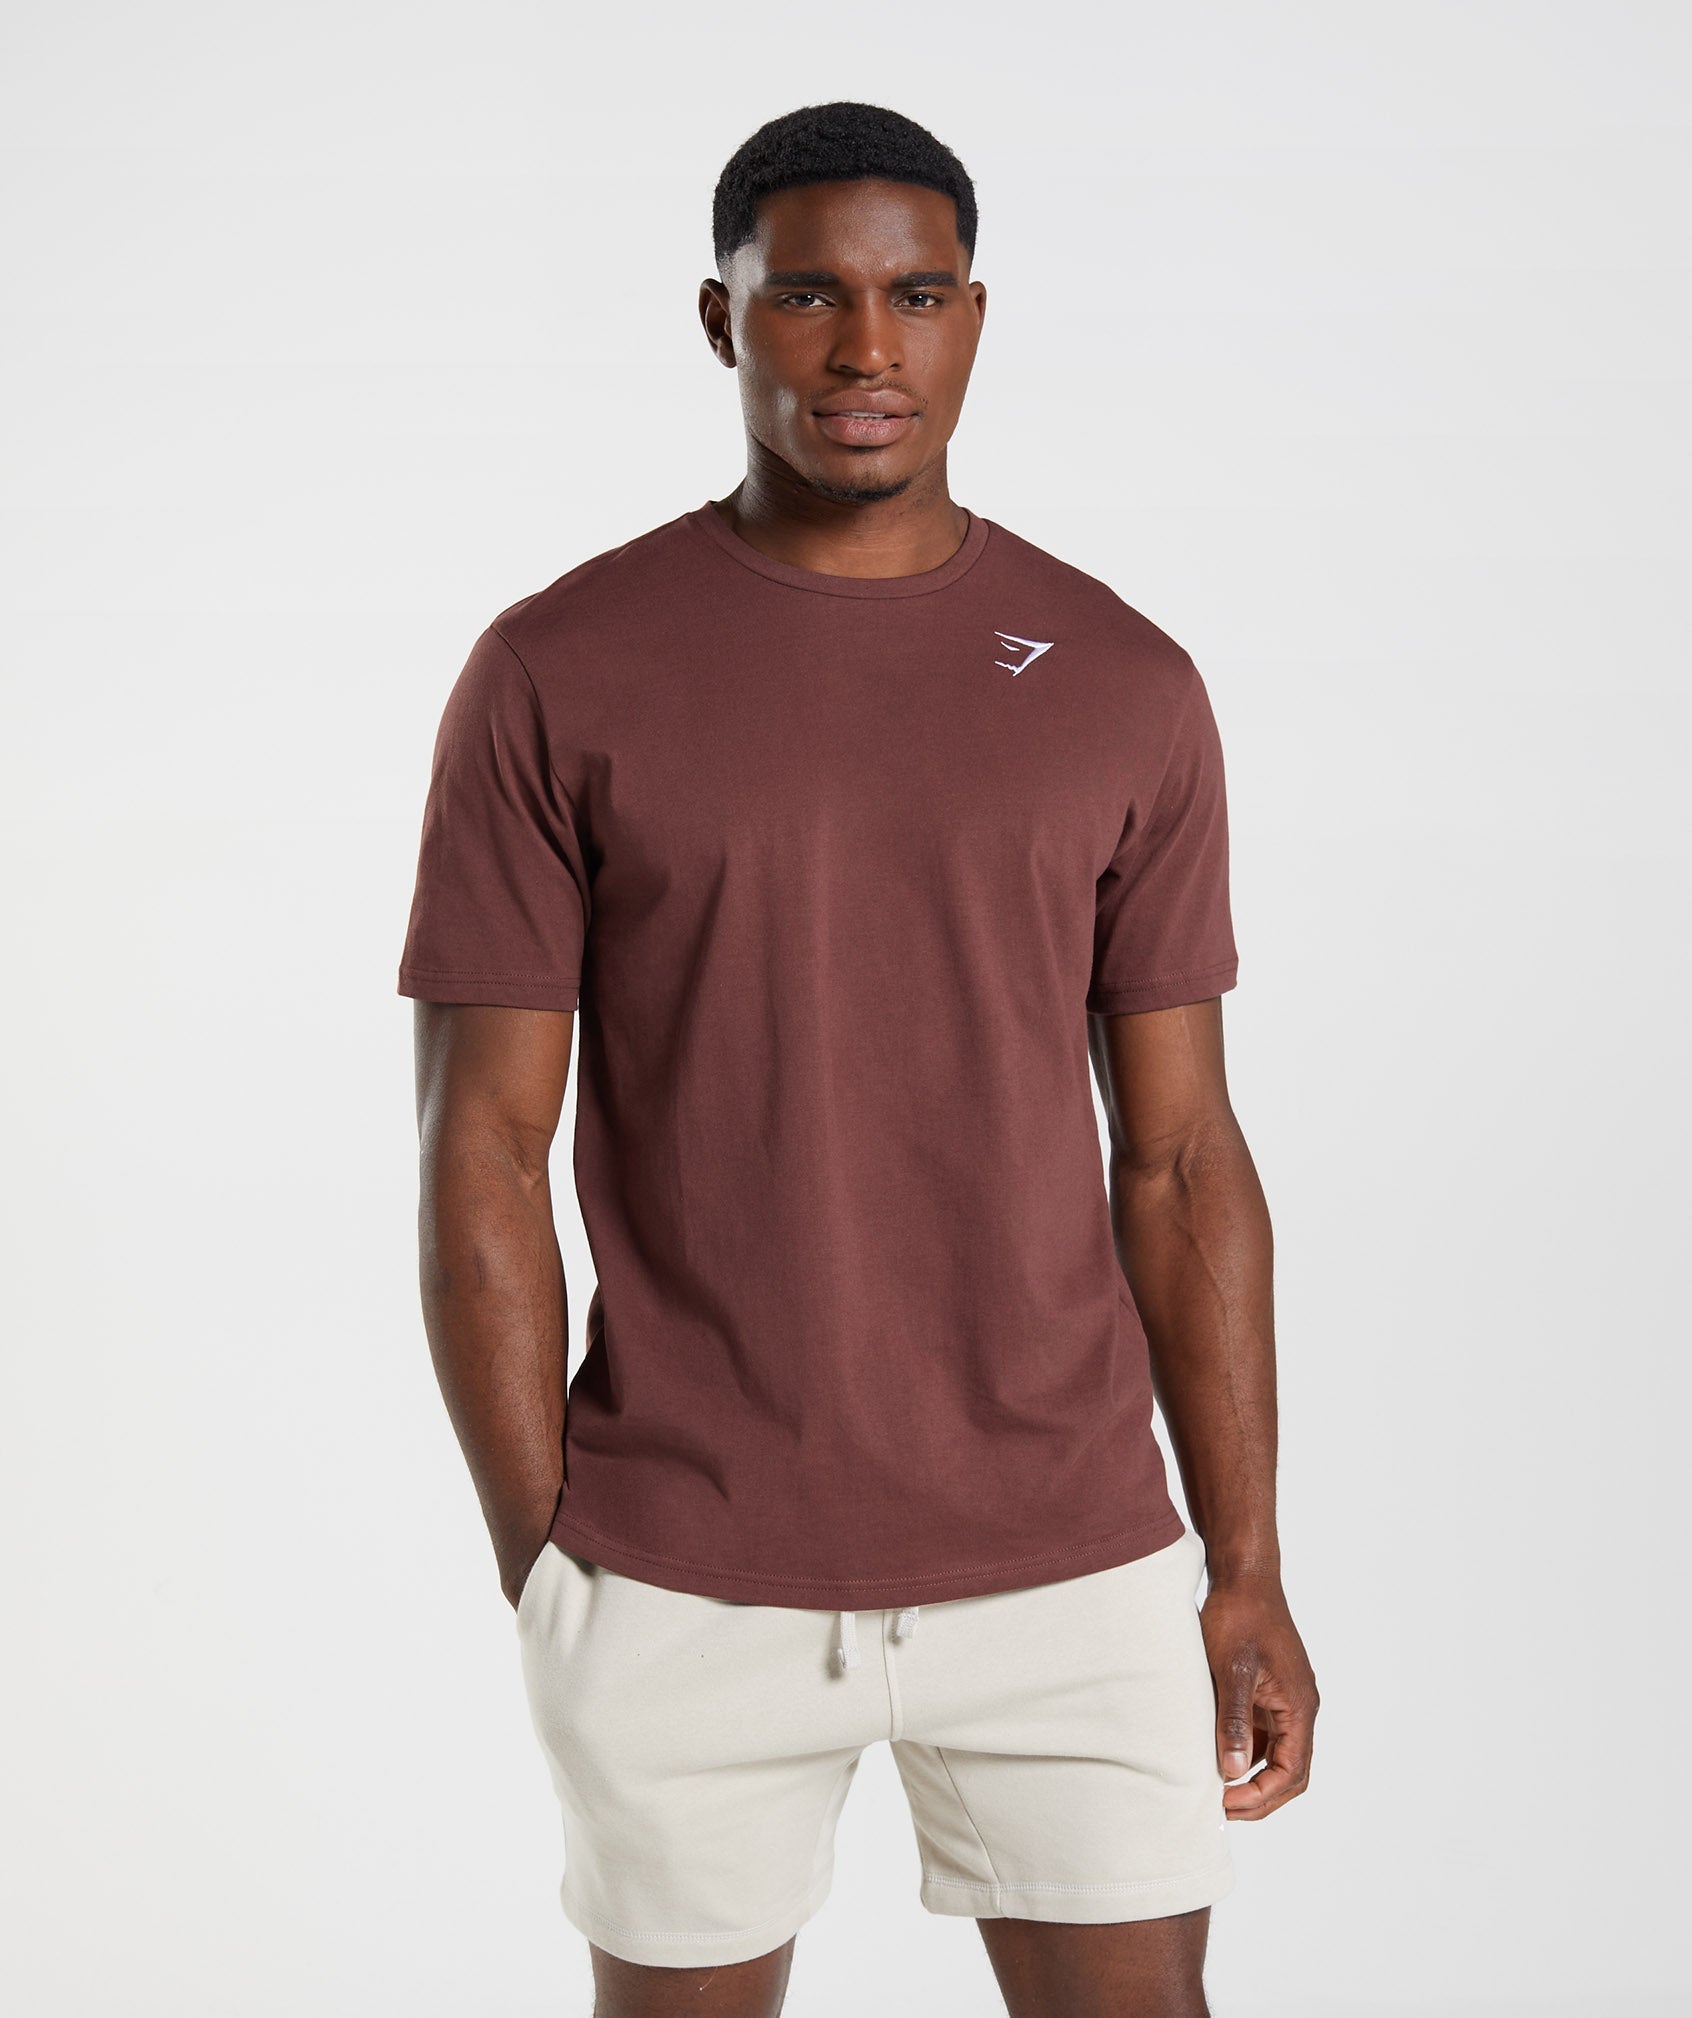 Crest T-Shirt in Cherry Brown is out of stock